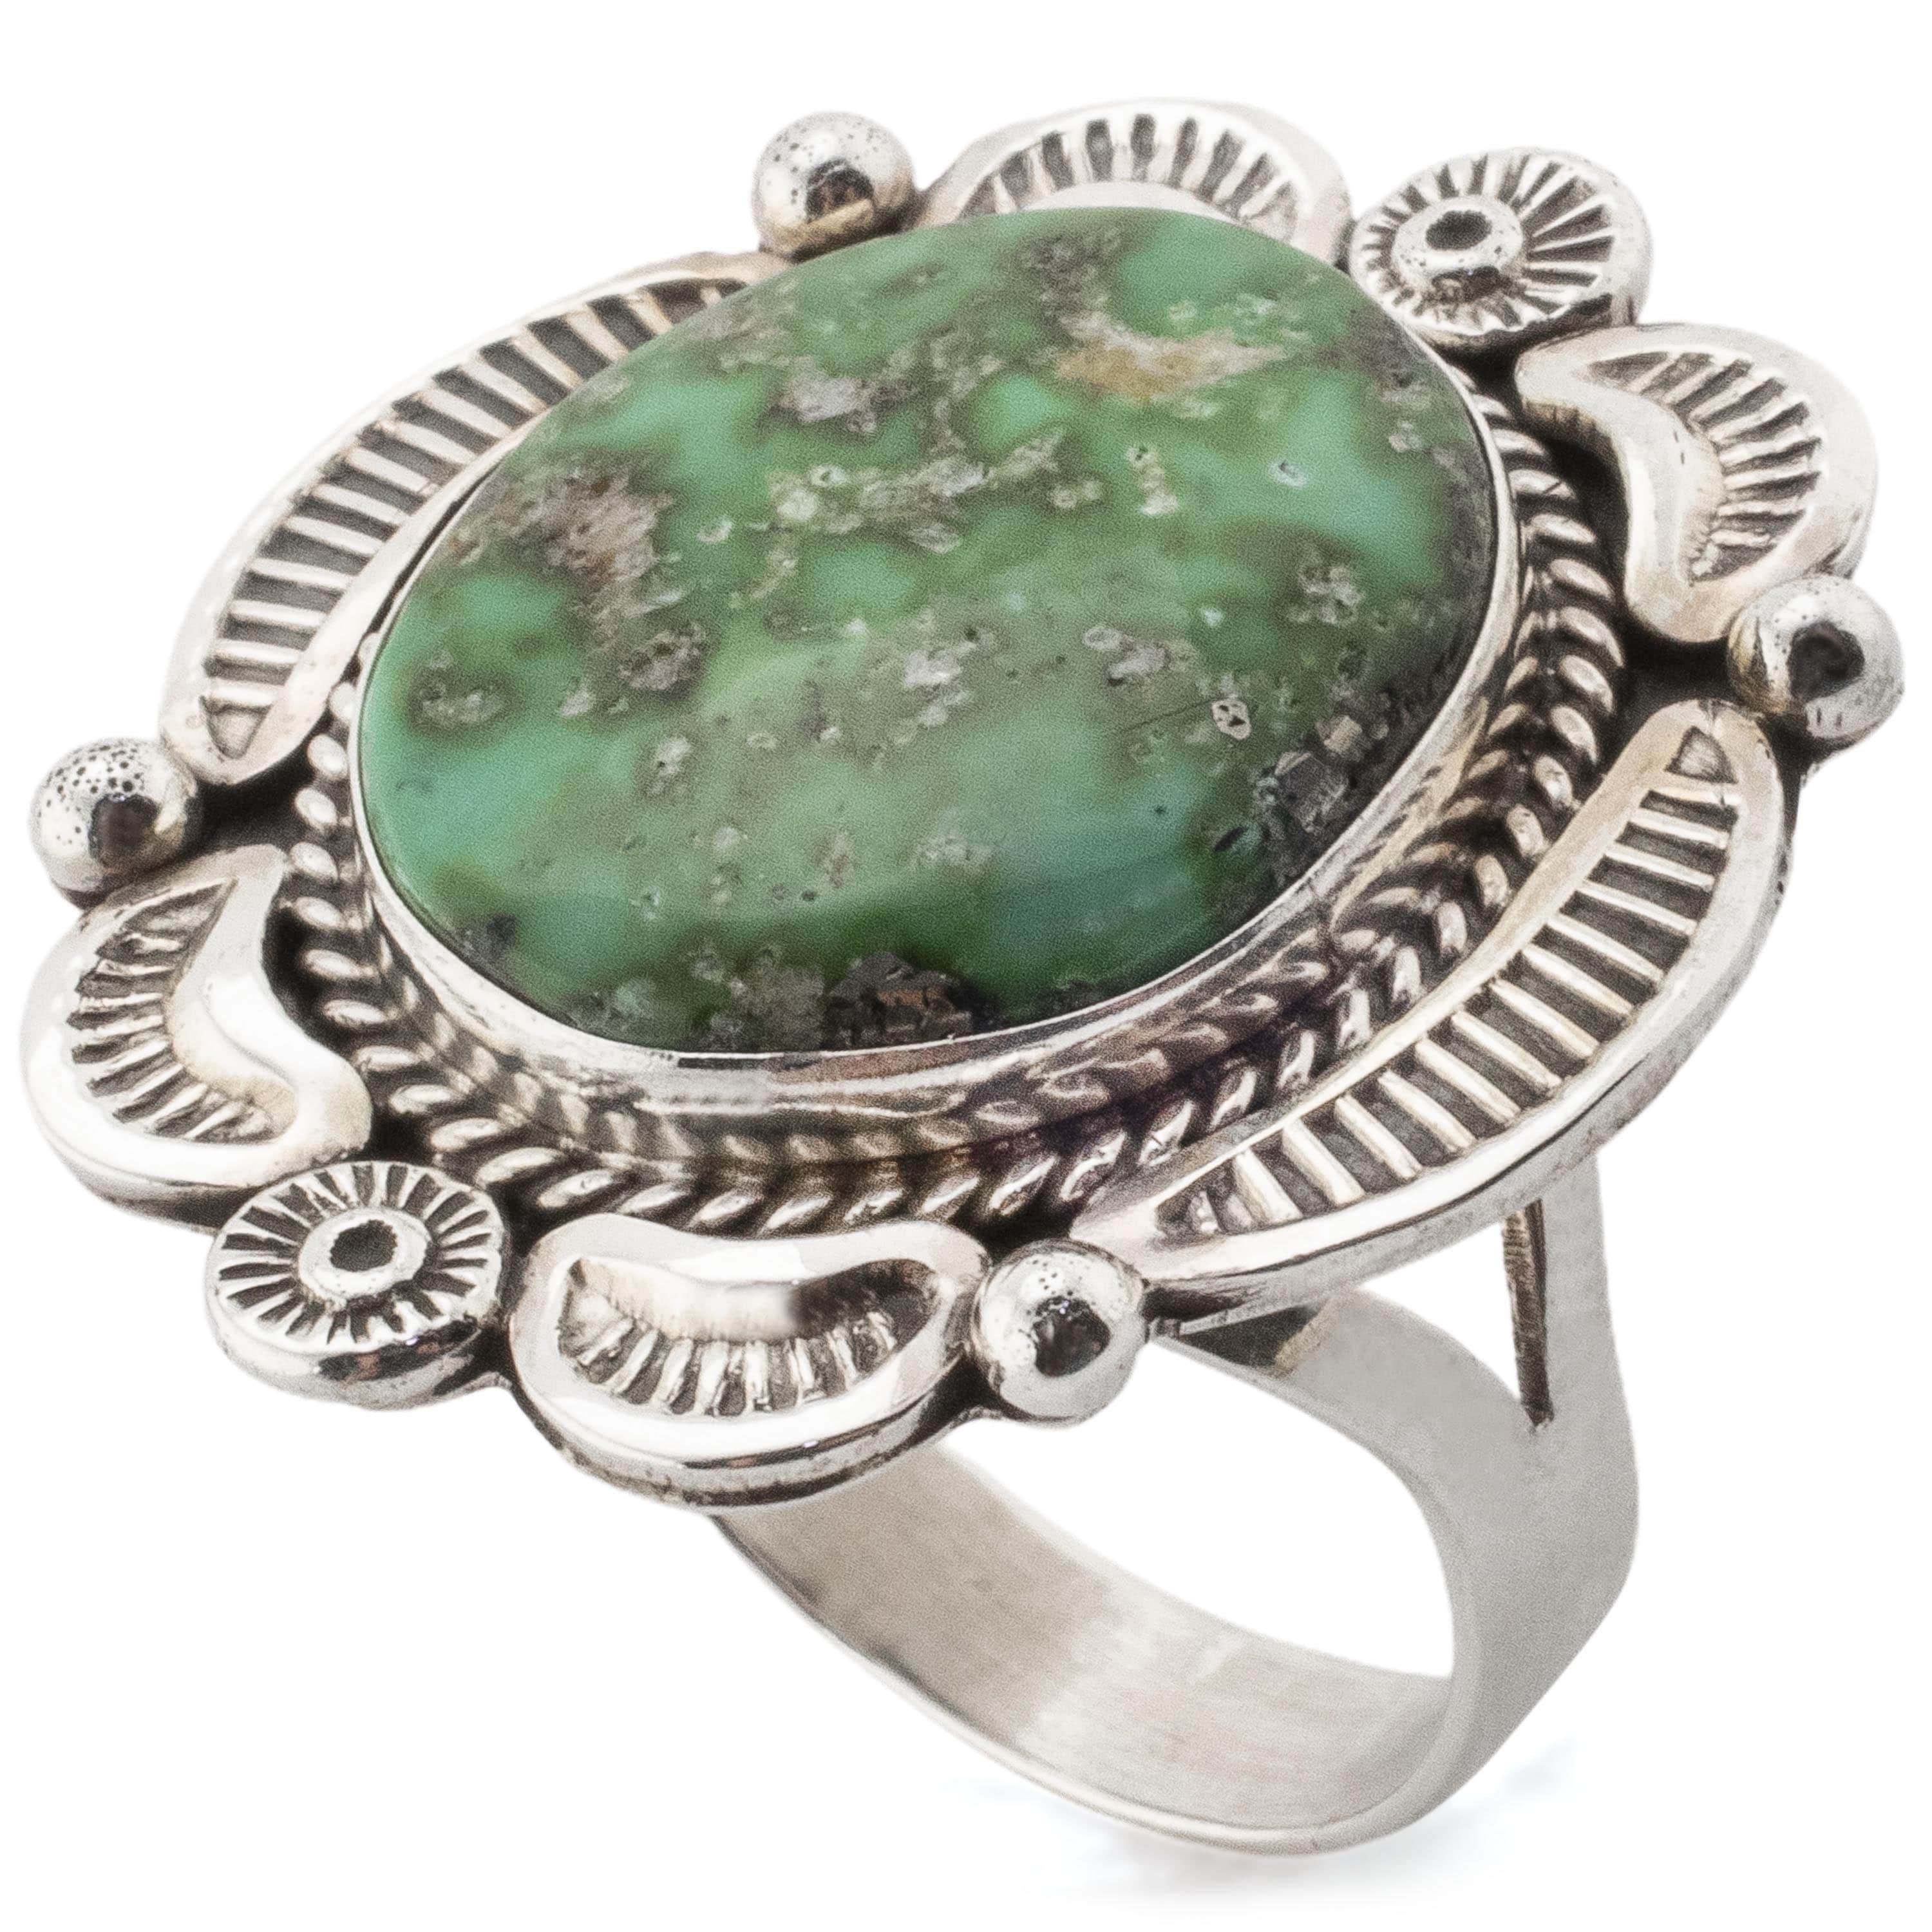 Kalifano Native American Jewelry 10.5 Ella M. Linkin Sonoran Gold Turquoise USA Native American Made 925 Sterling Silver Ring NAR1000.008.105